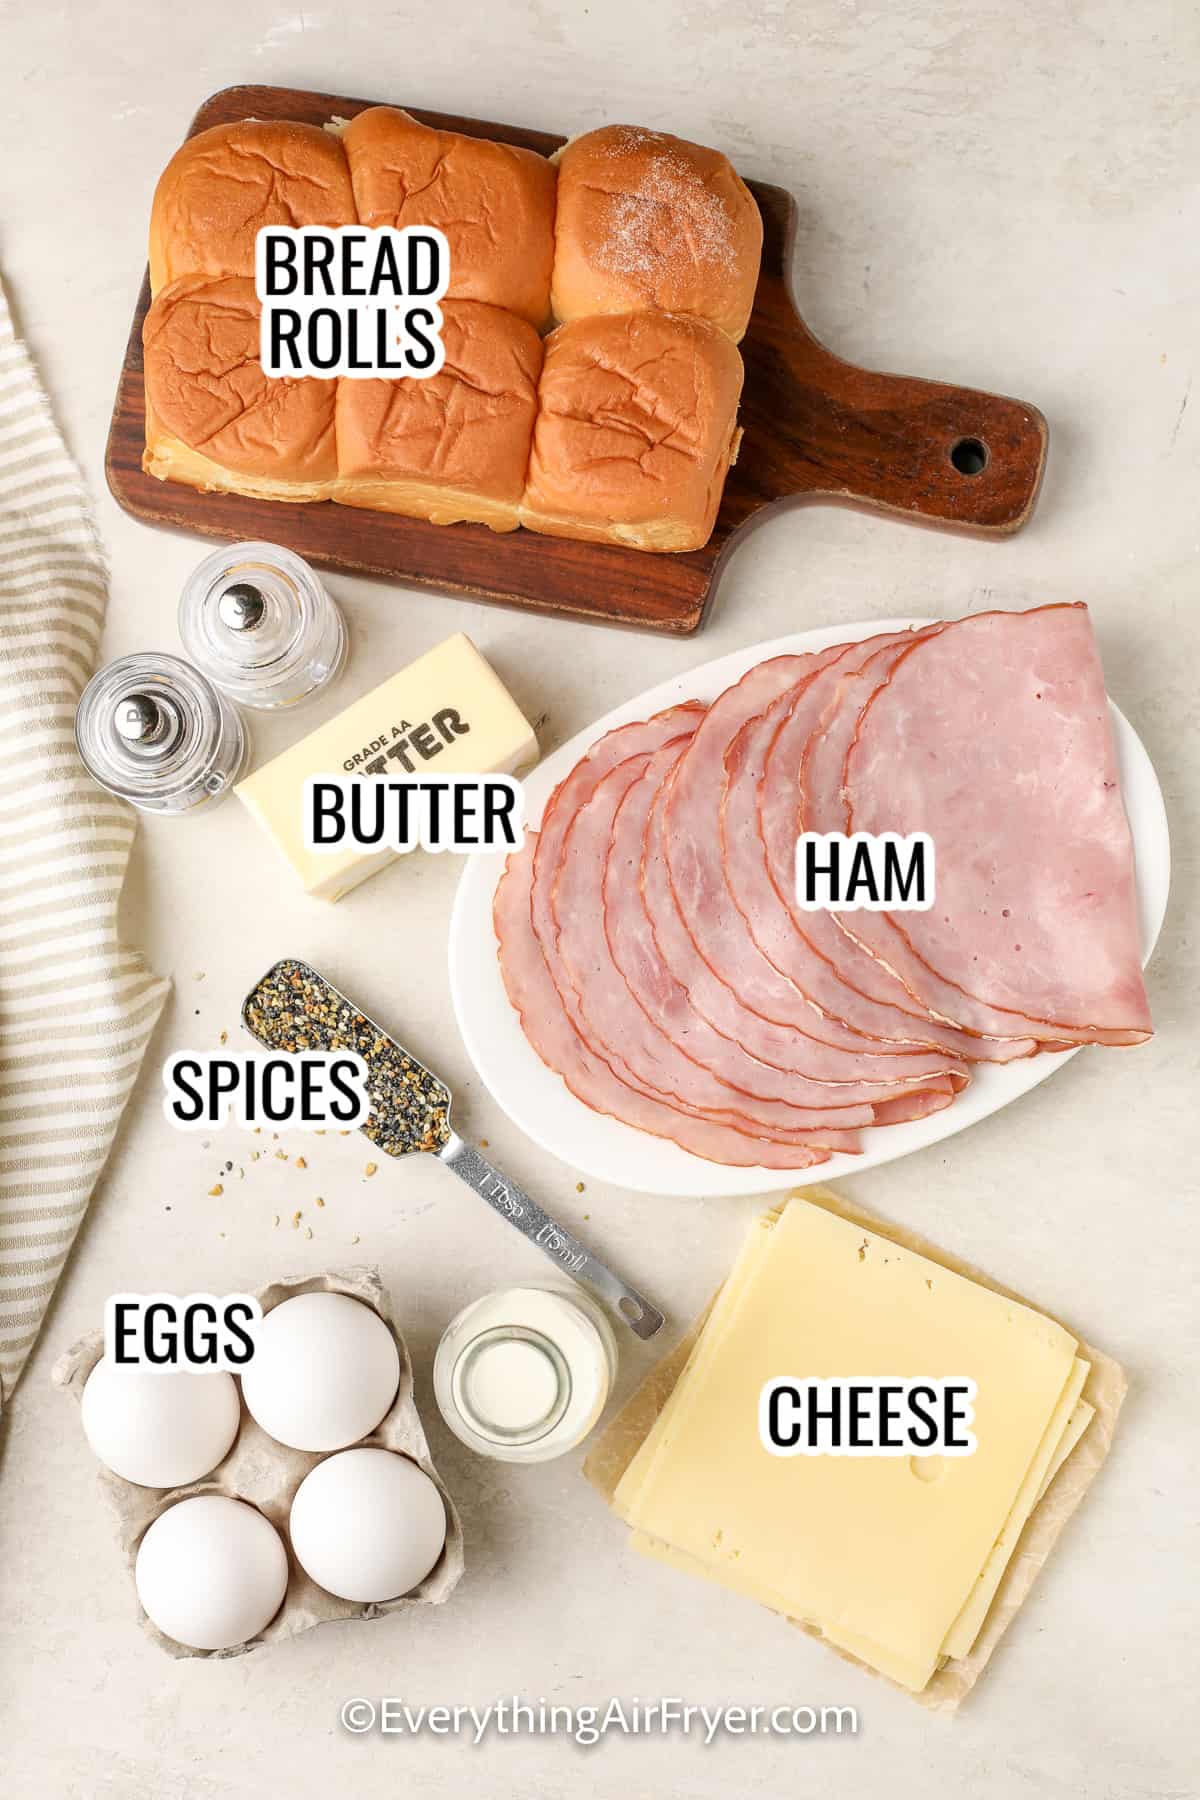 ingredients assembled to make breakfast sliders including bread rolls, butter, ham, eggs, cheese, and spices